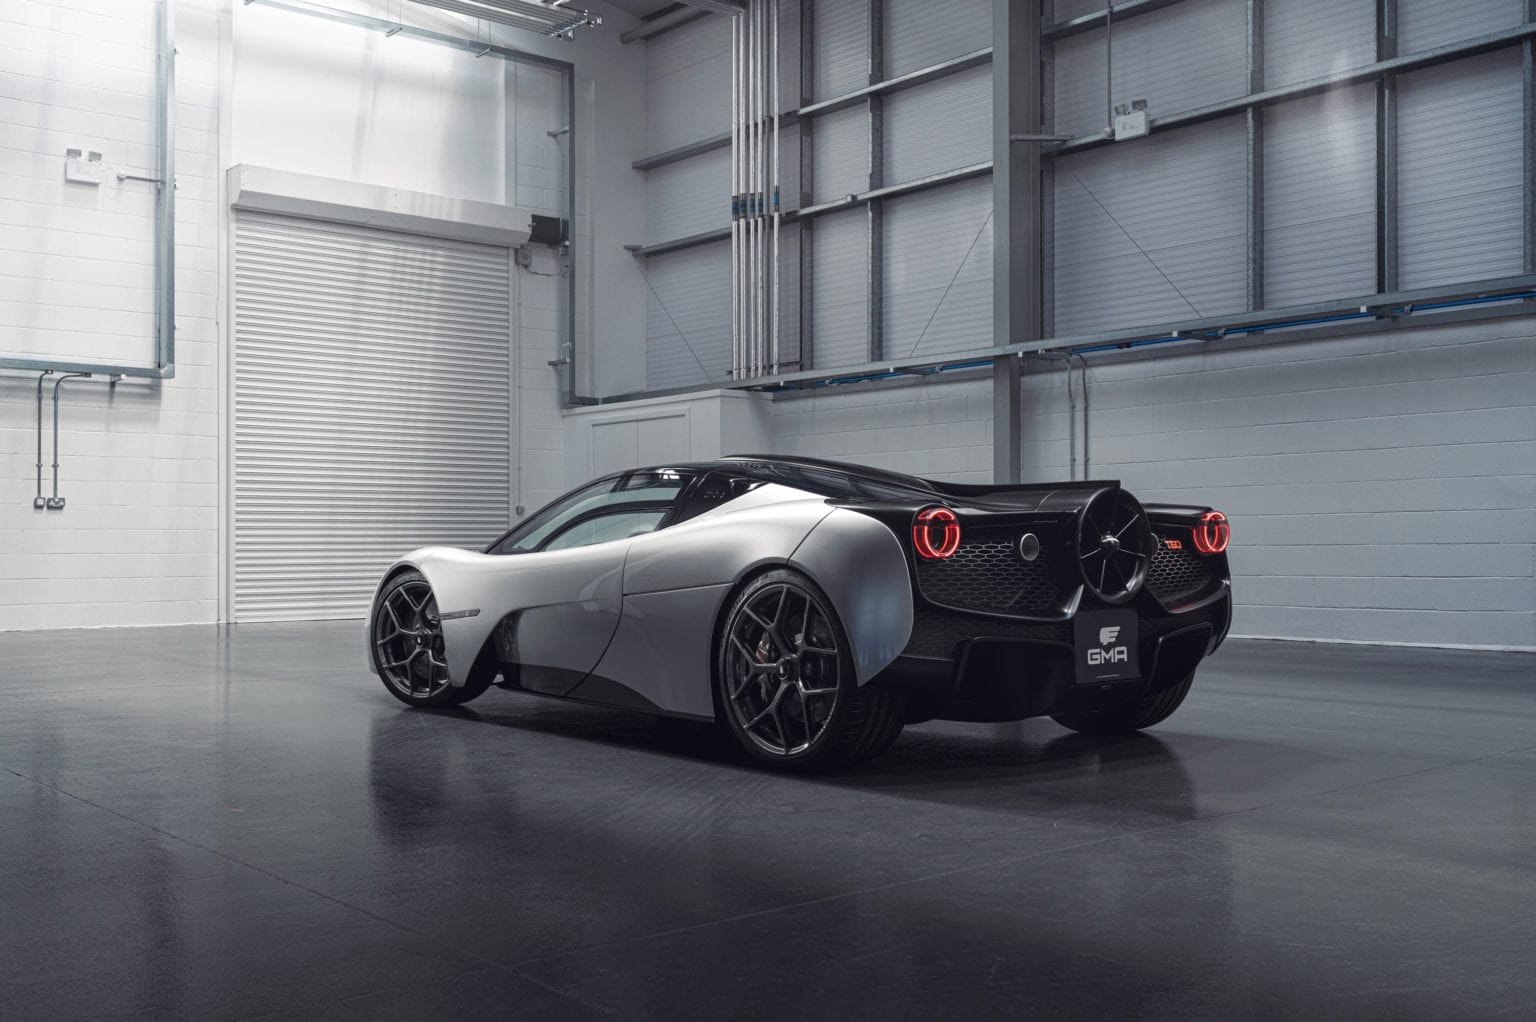 Gordon Murray's T50 Supercar has been revealed